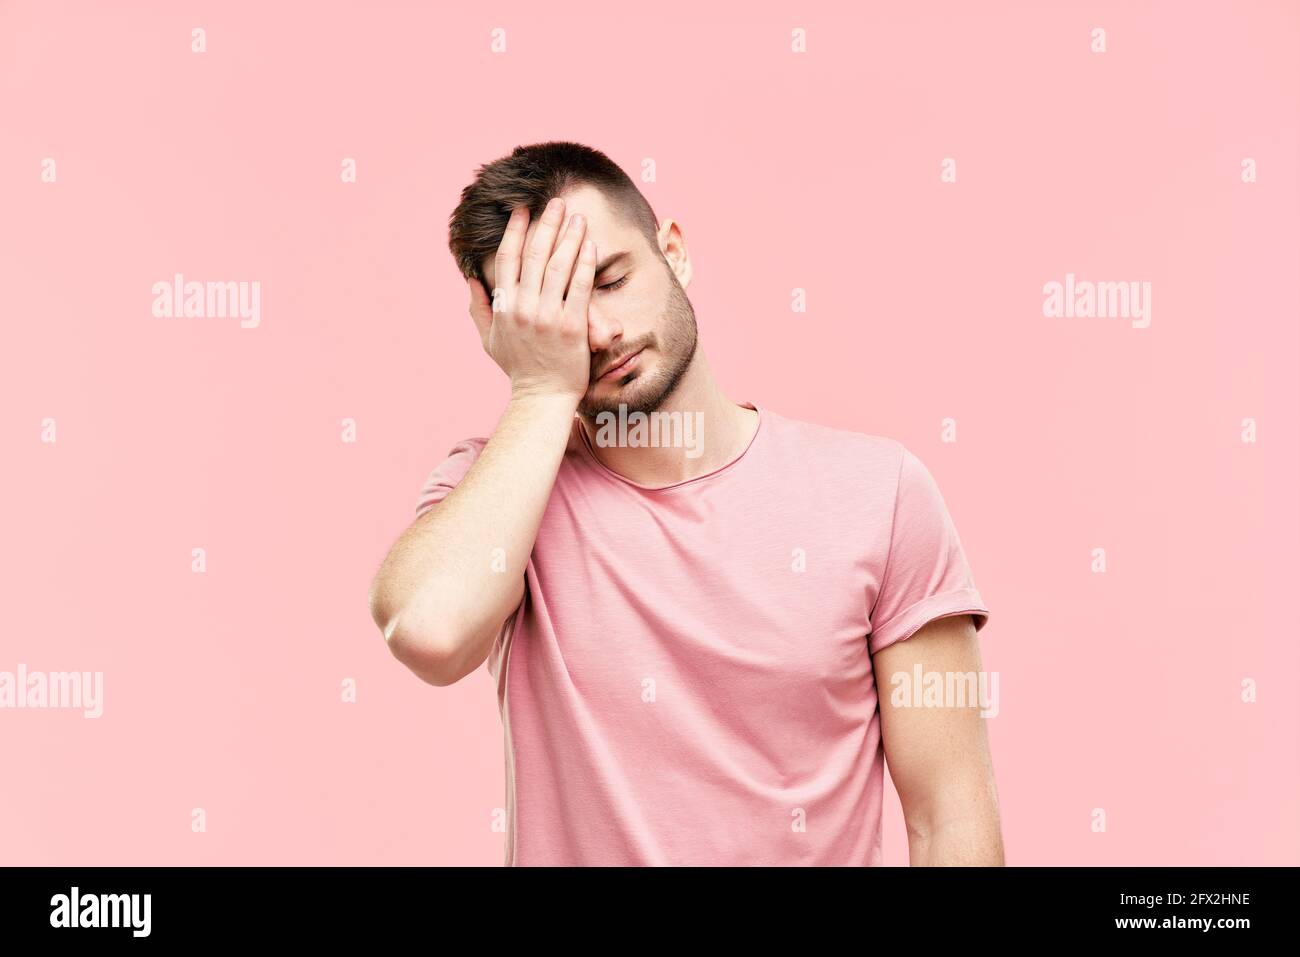 Tired disappointed young man with face palm gesture over pink background. Emotion concept Stock Photo